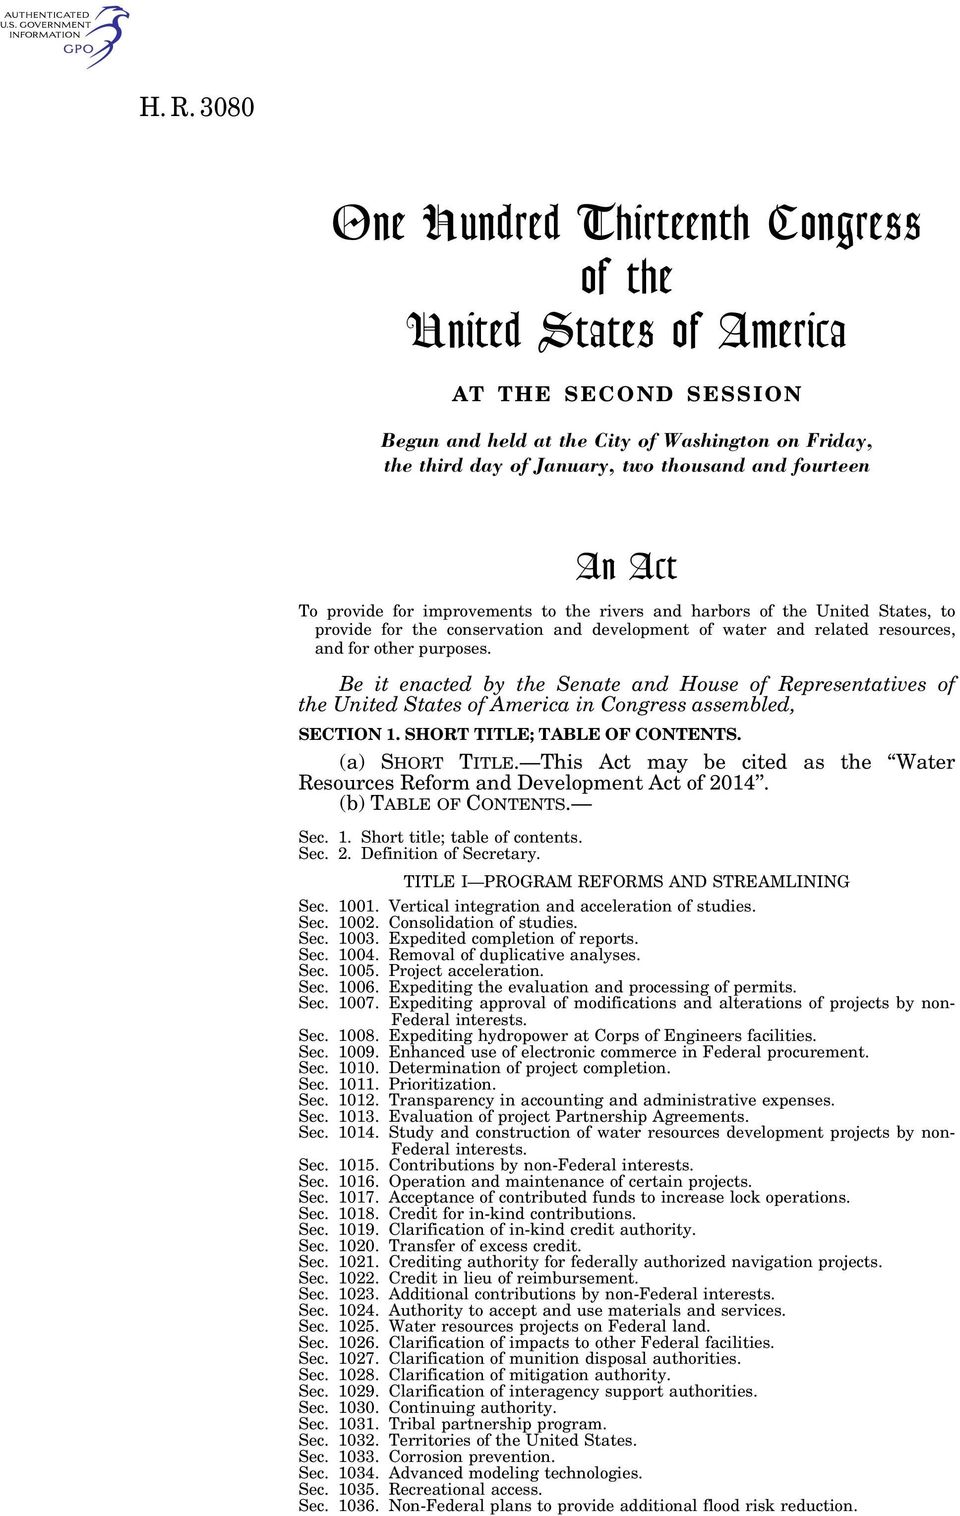 Be it enacted by the Senate and House of Representatives of the United States of America in Congress assembled, SECTION 1. SHORT TITLE; TABLE OF CONTENTS. (a) SHORT TITLE.